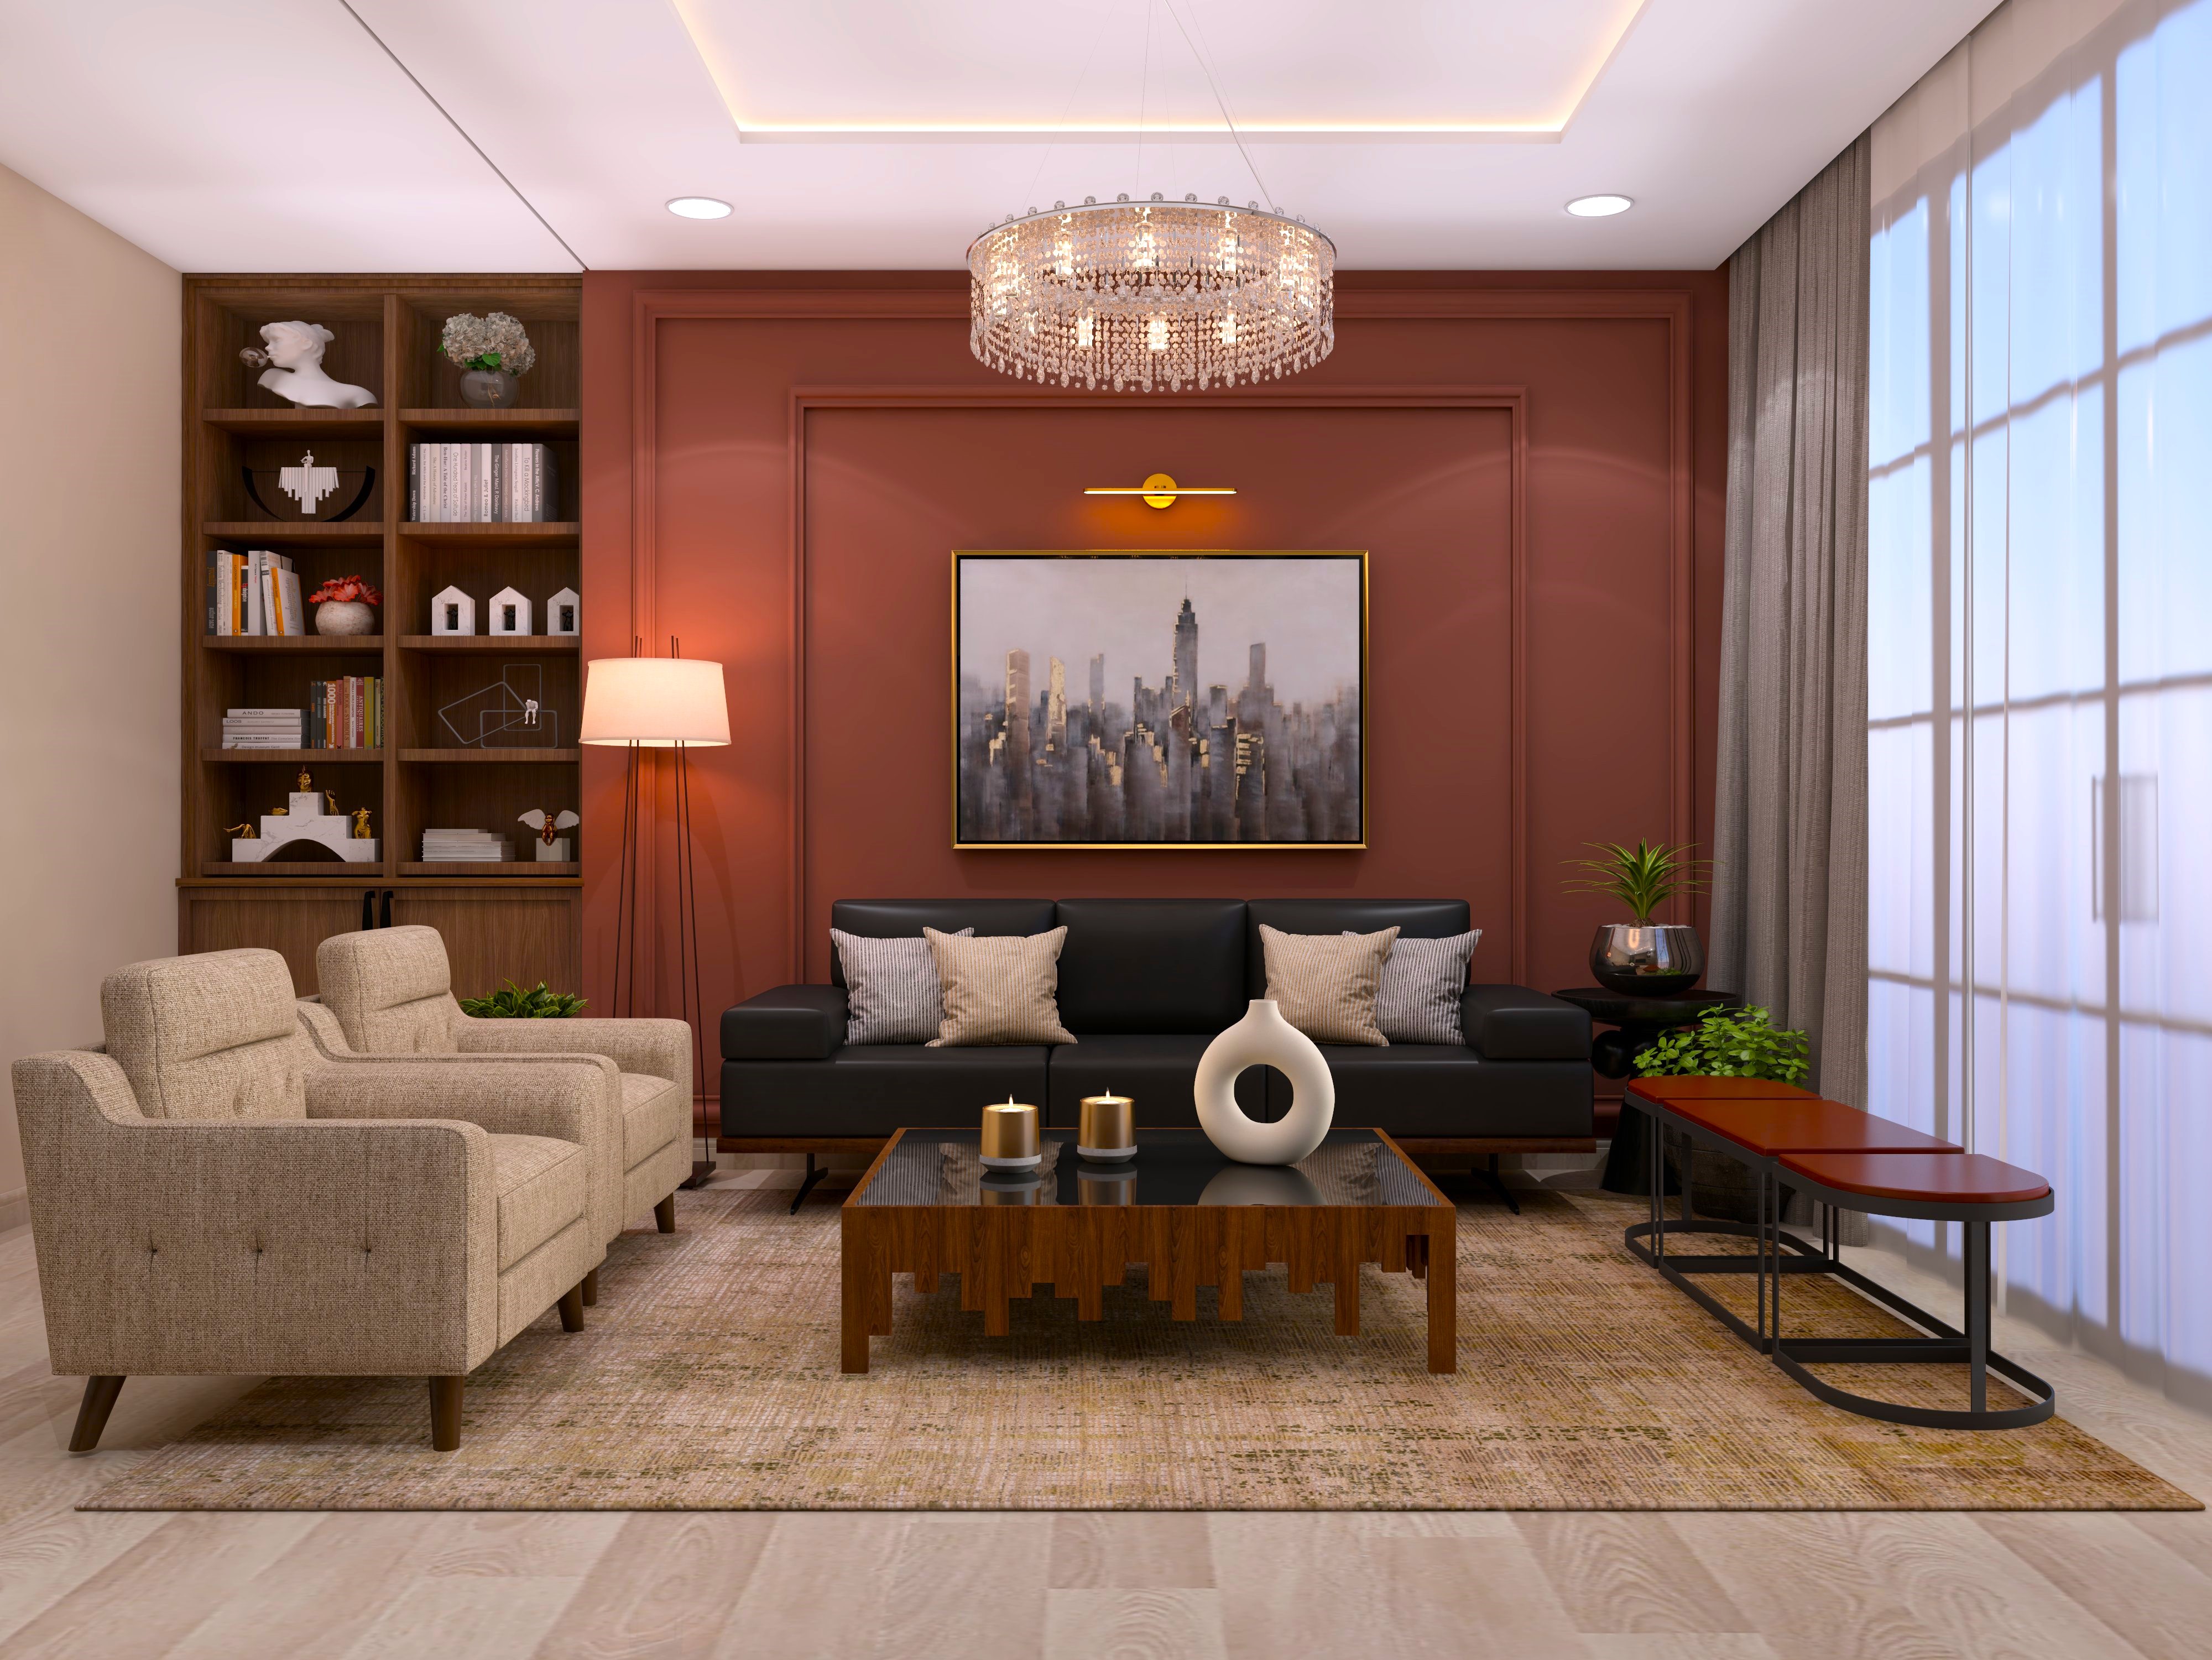 Living room with black leather sofa and brick red wall trims - Beautiful Homes